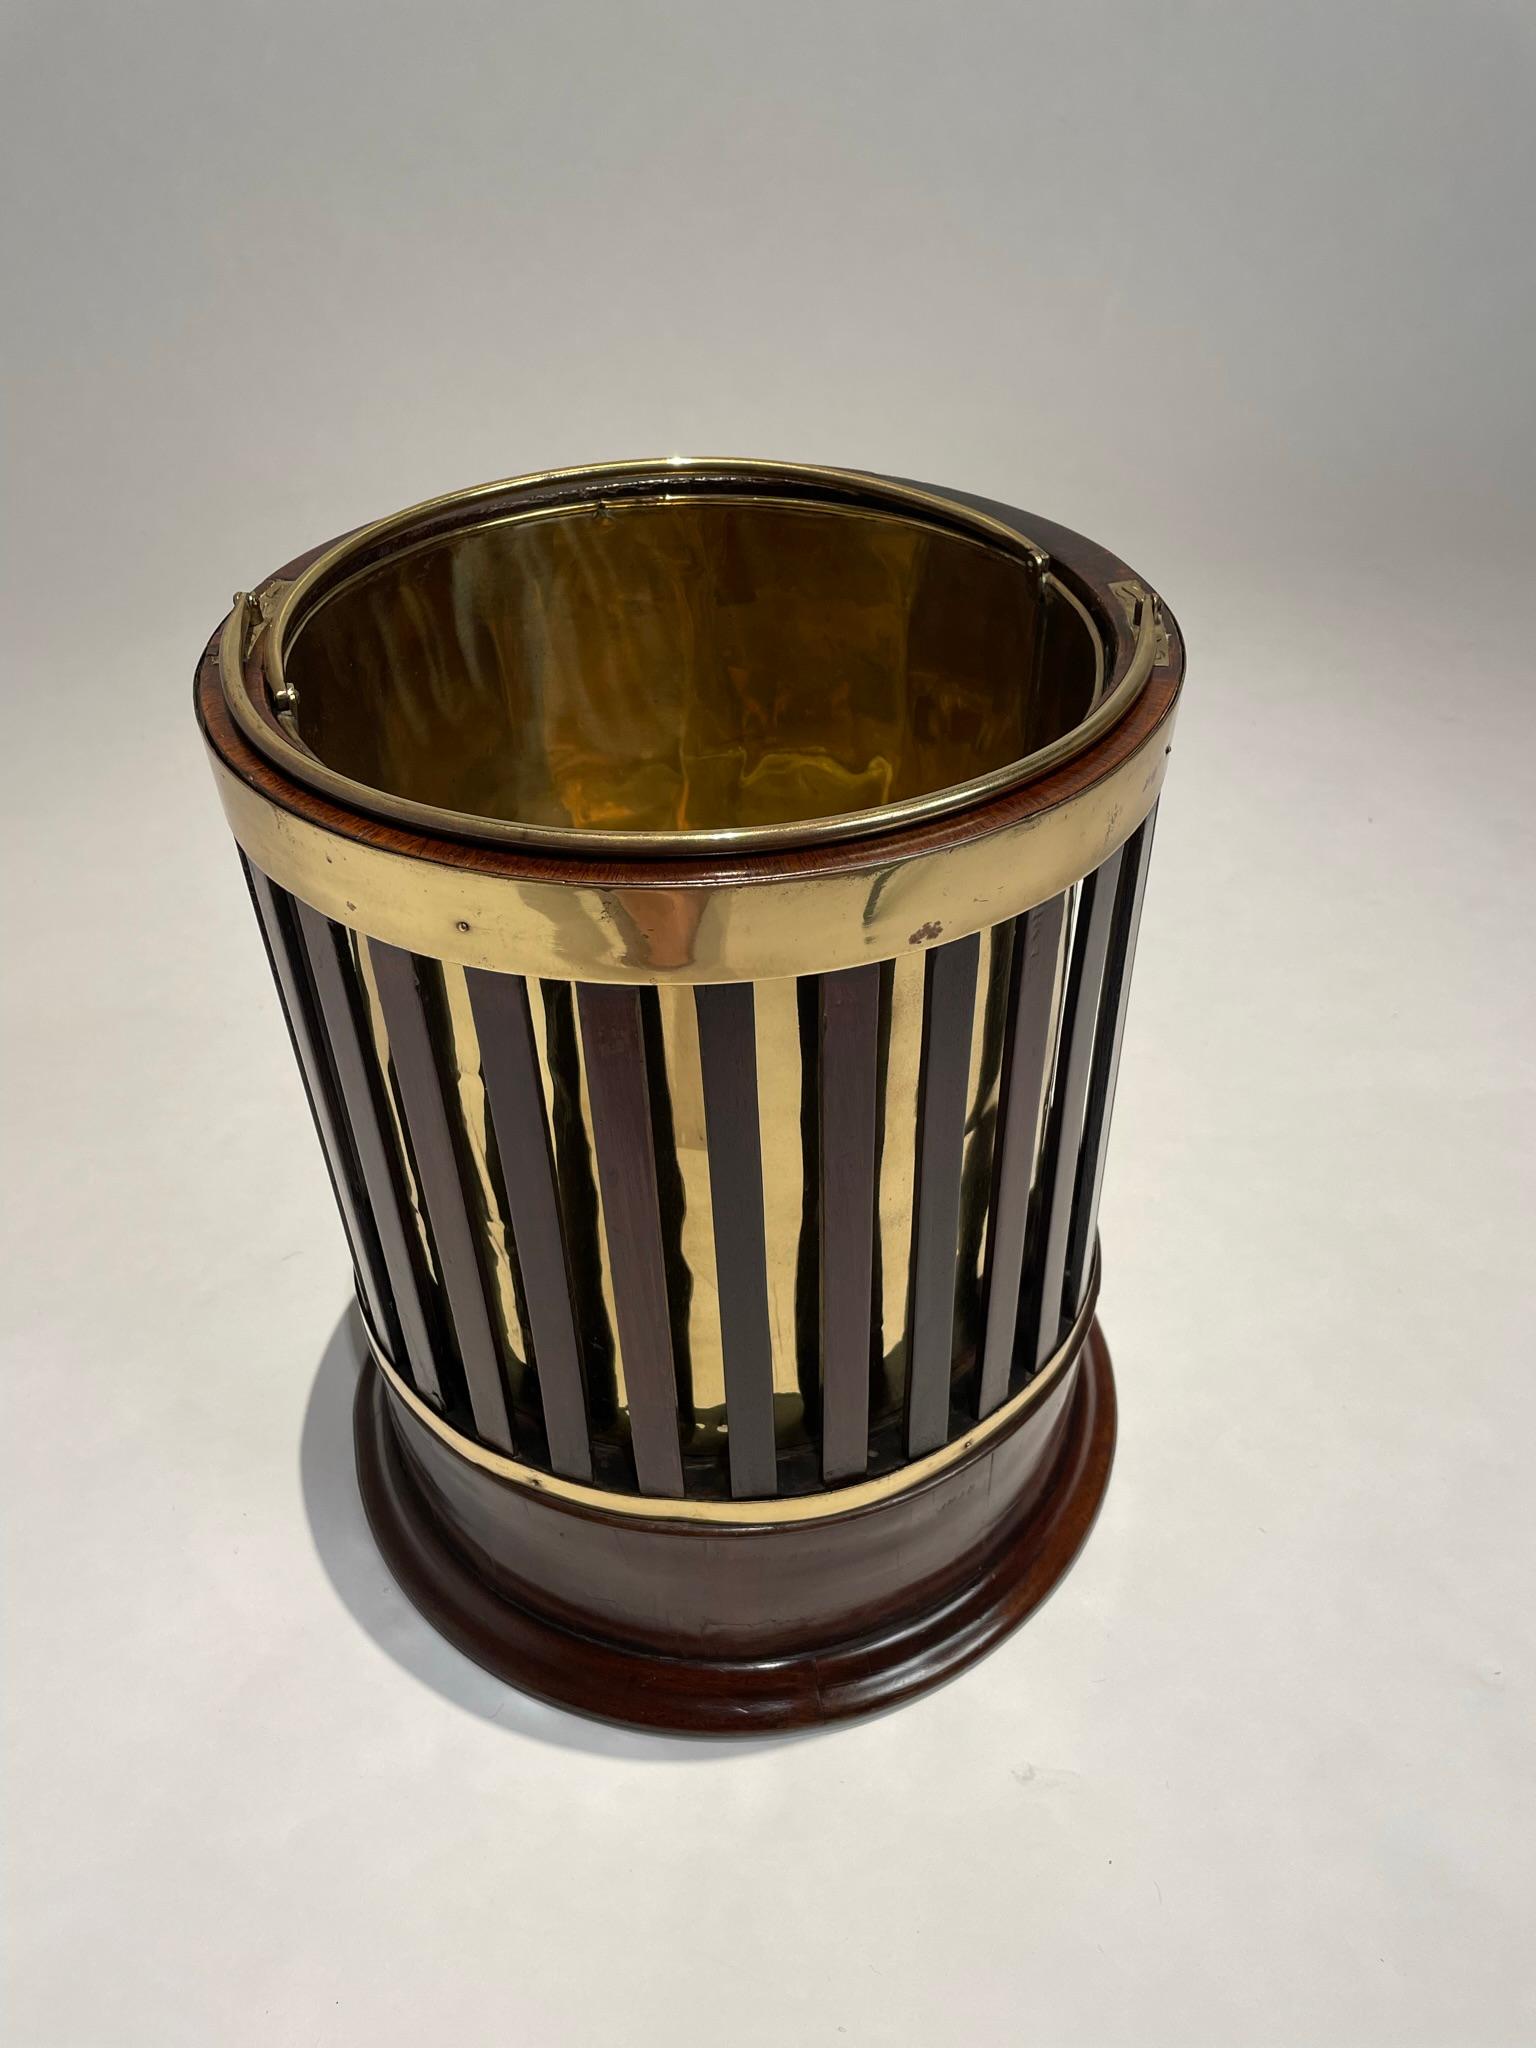 English Regency peat bucket of beautiful design, with slats of mahogany revealing the brass bucket liner within. I've never seen one like this. Retaining the original brass bucket liner.
This will make a very handsome waste bin, trash can or ice